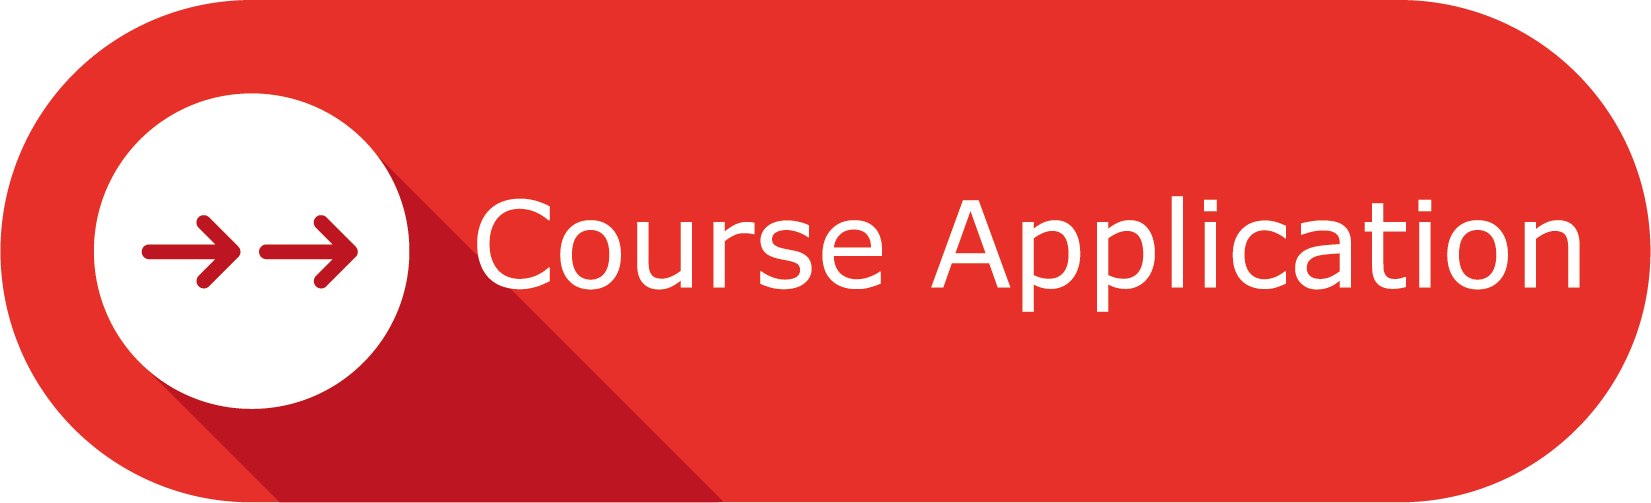 course%20application%20icon.png